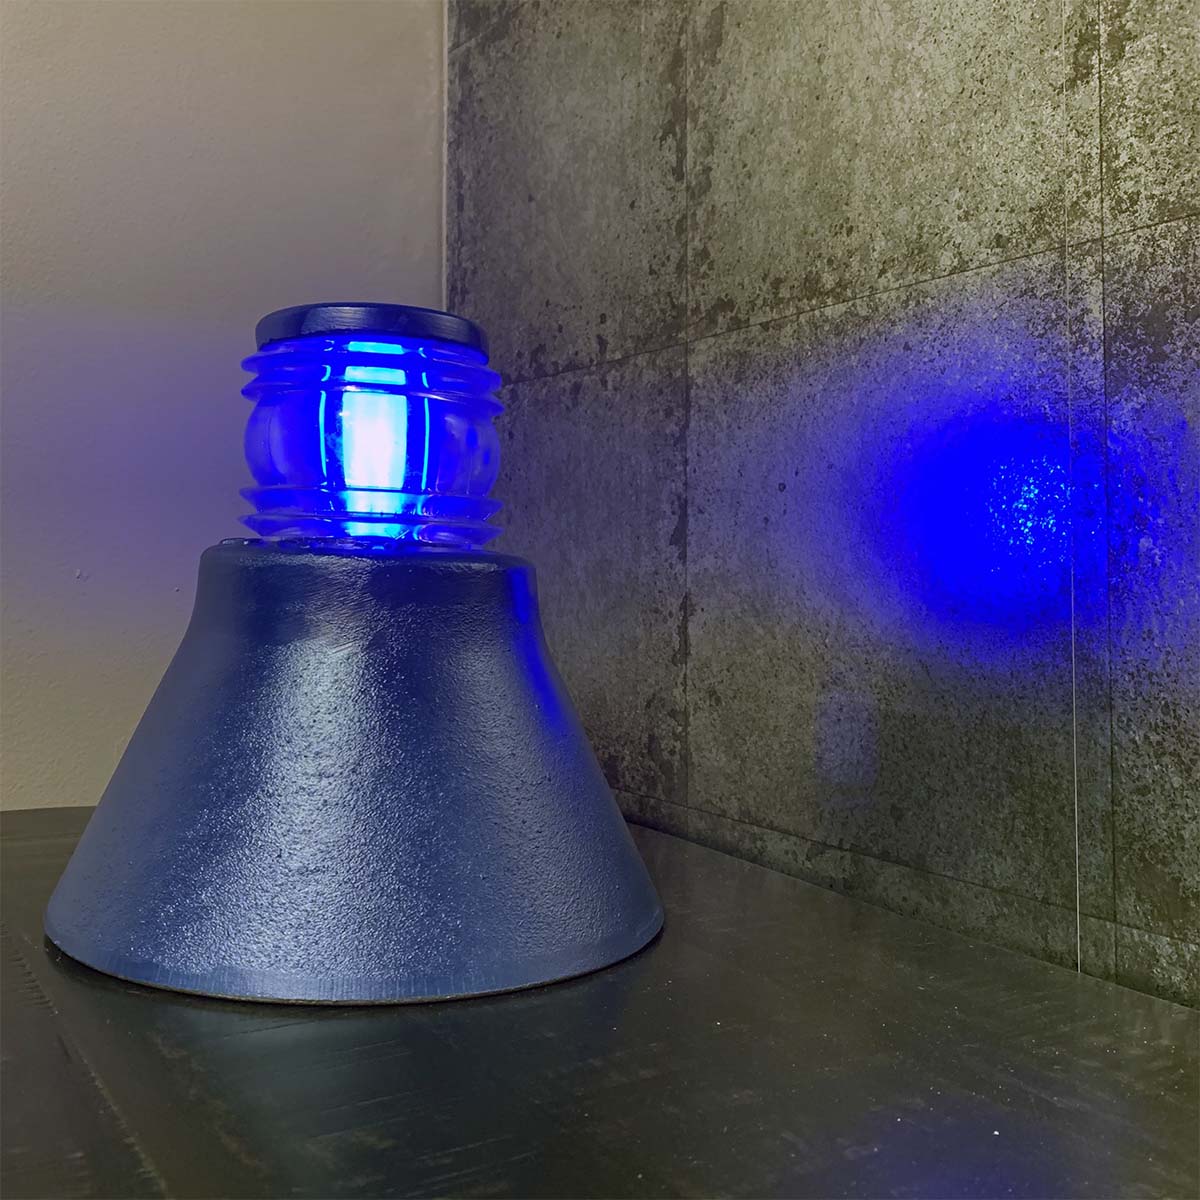 Refurbished Koninklijke Luchtmacht taxiway light with the blue light reflecting on the wall.